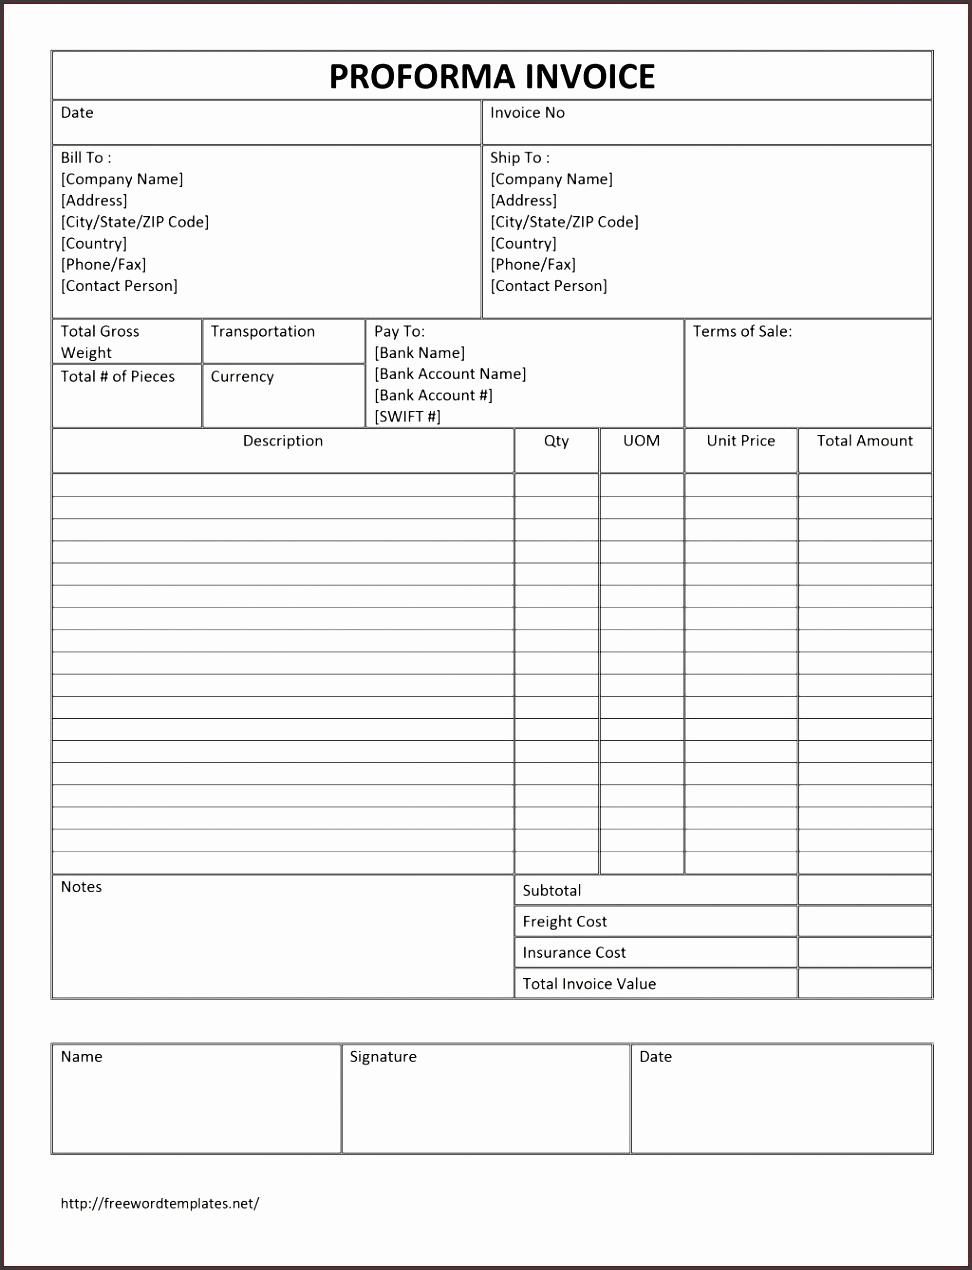 blank towing invoice template free receipt sample excel proforma